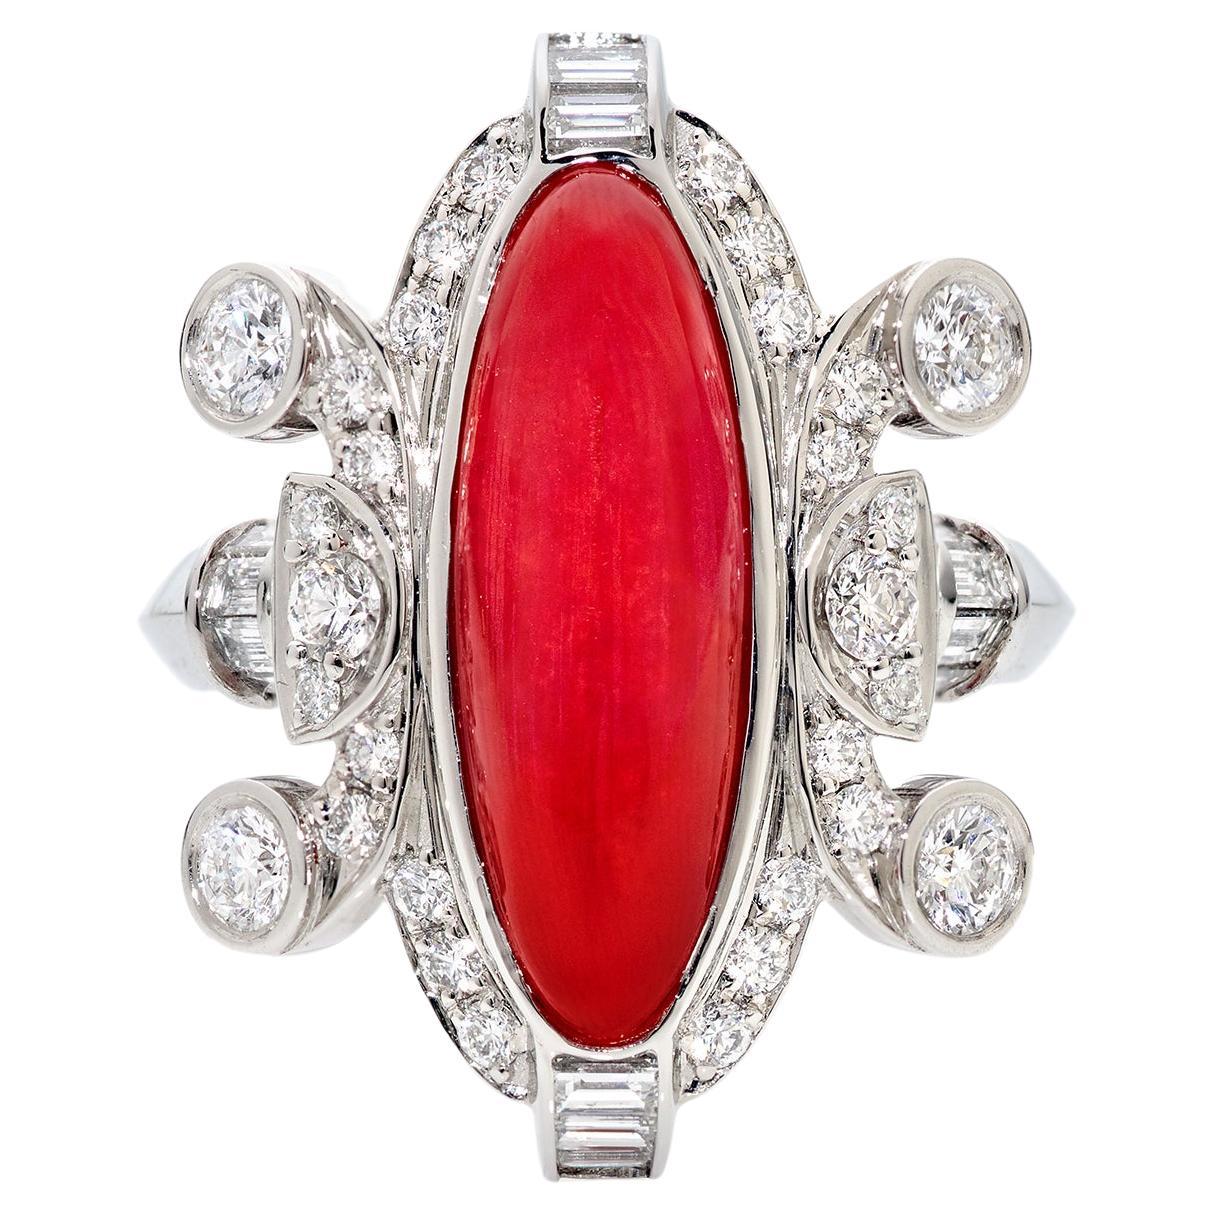 4.35 Carat Vintage Oxblood Coral and 2.07 Carats Diamond Ring Set in Platinum For Sale